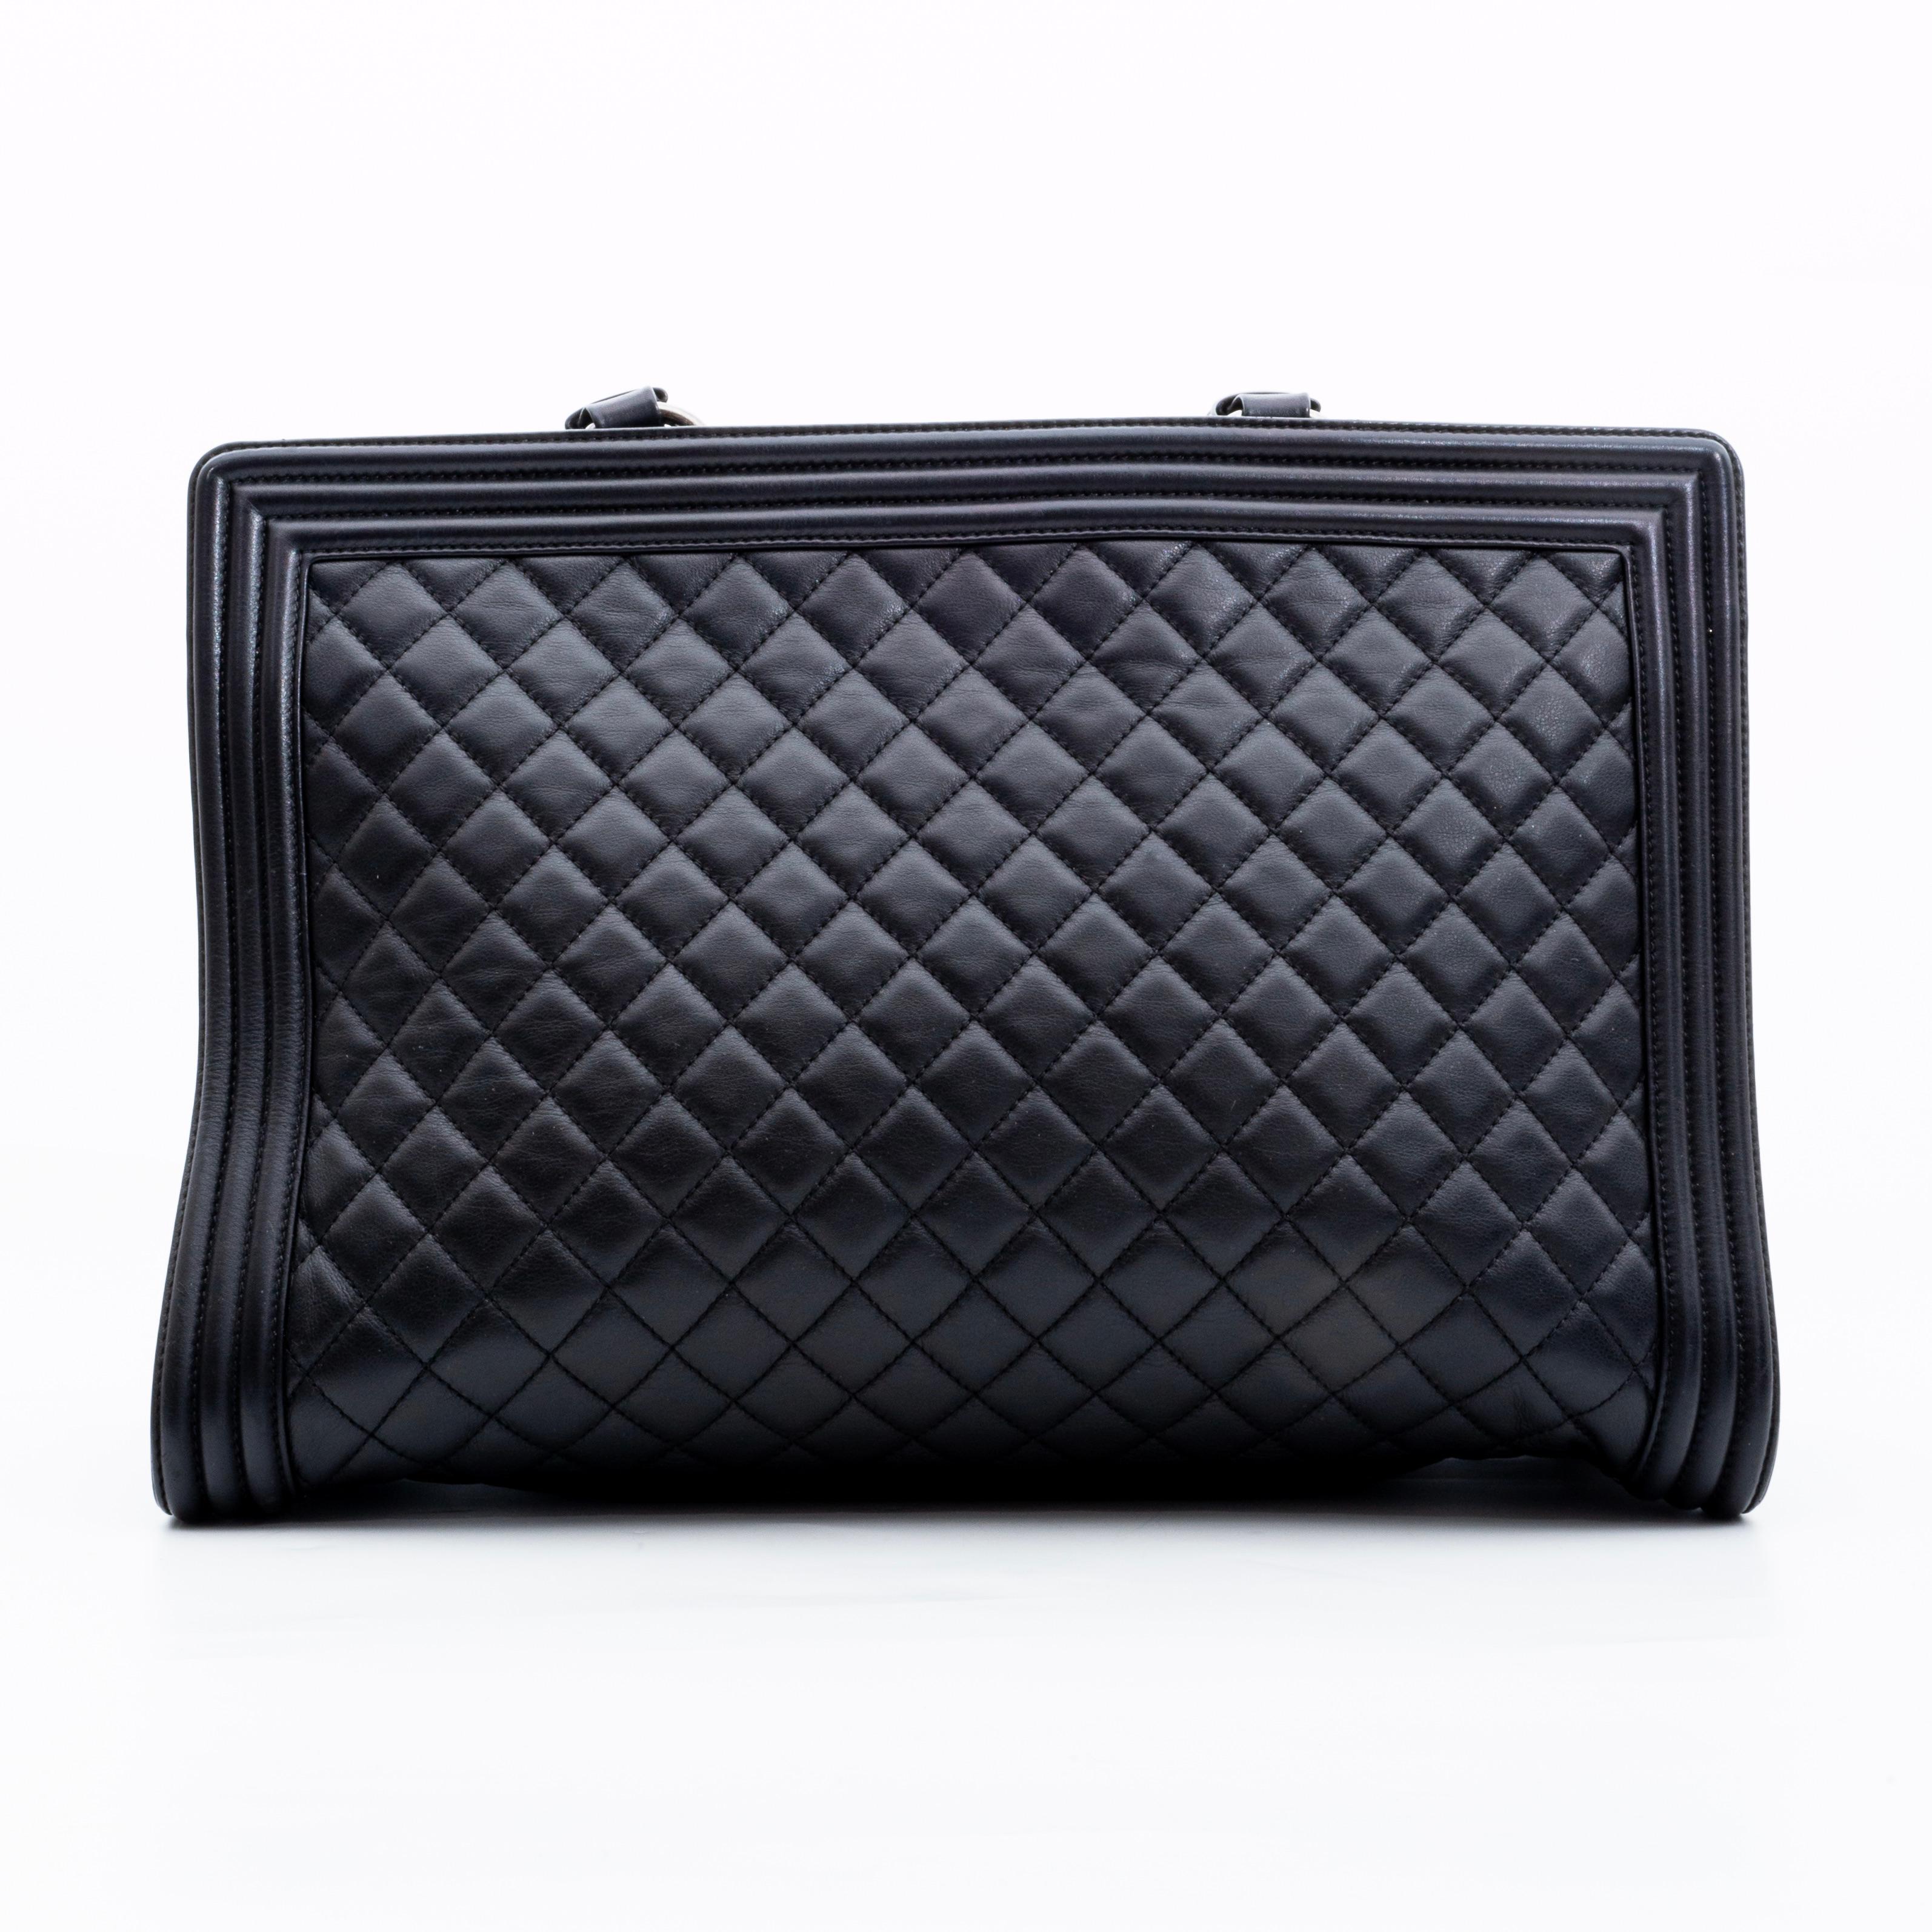 This bag is made with soft and supple lambskin leather in black with diamond quilting in black. The bag features dual flat top handles attached by metal links, aged Ruthenium hardware, Chanel 